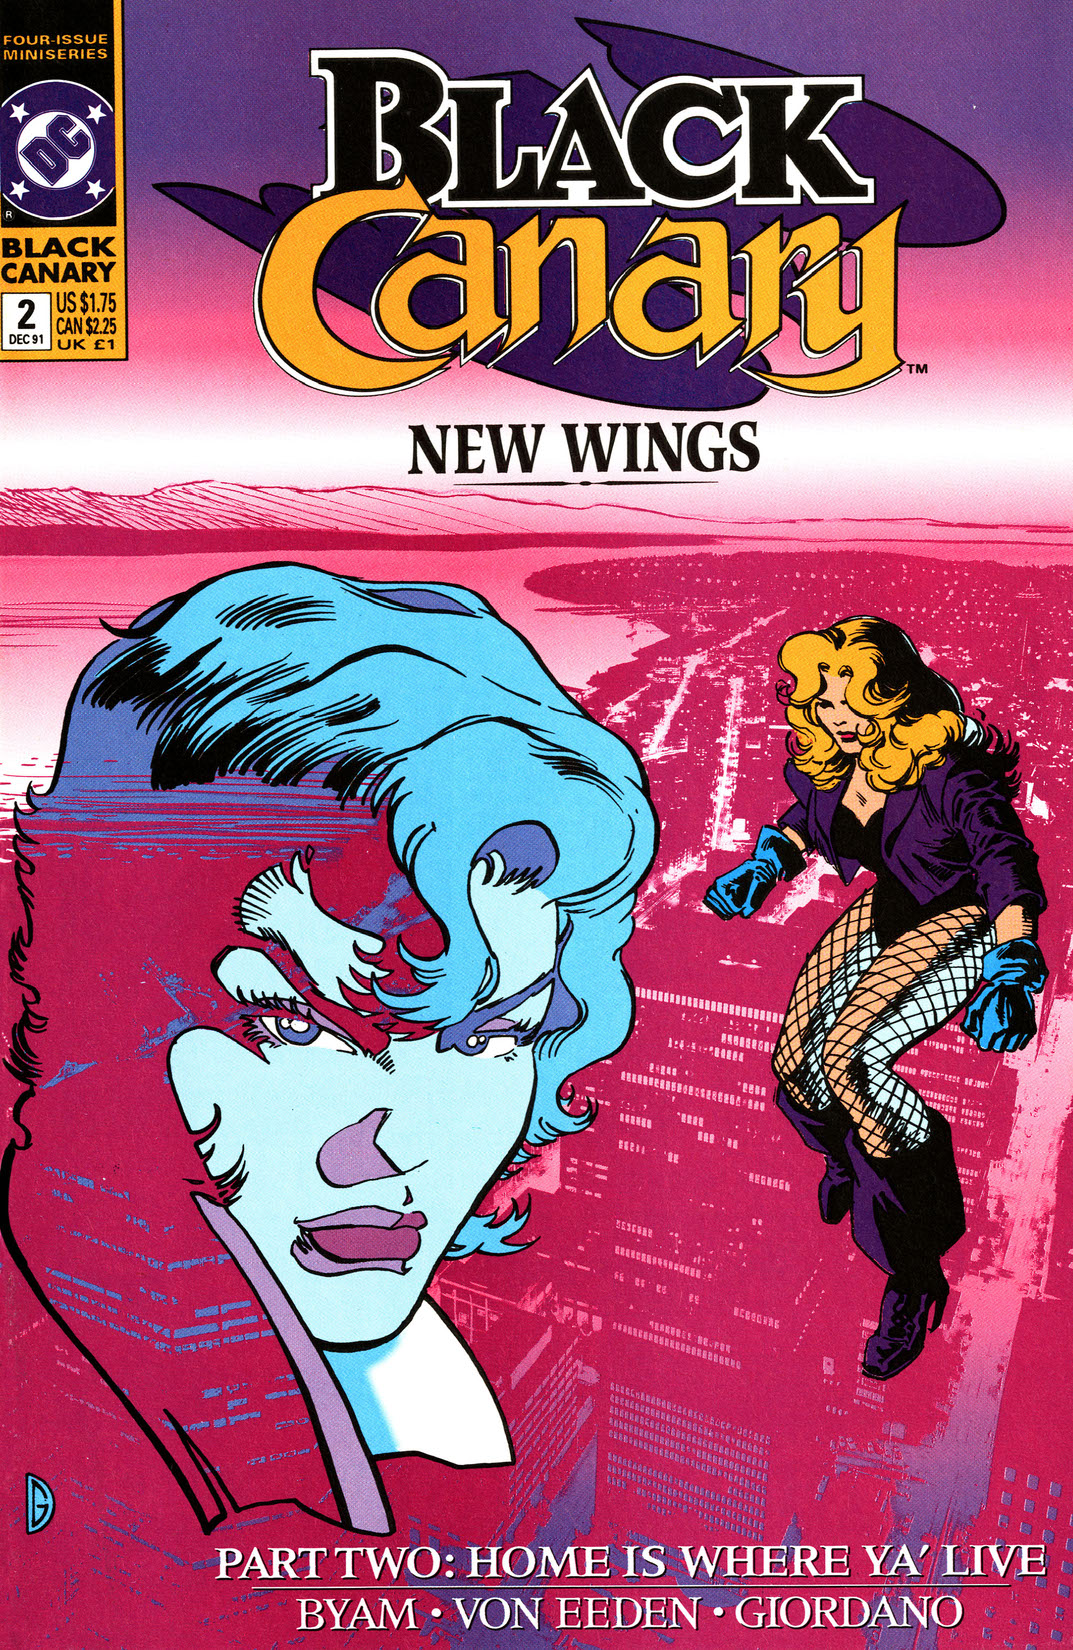 Black Canary (1991-) #2 preview images